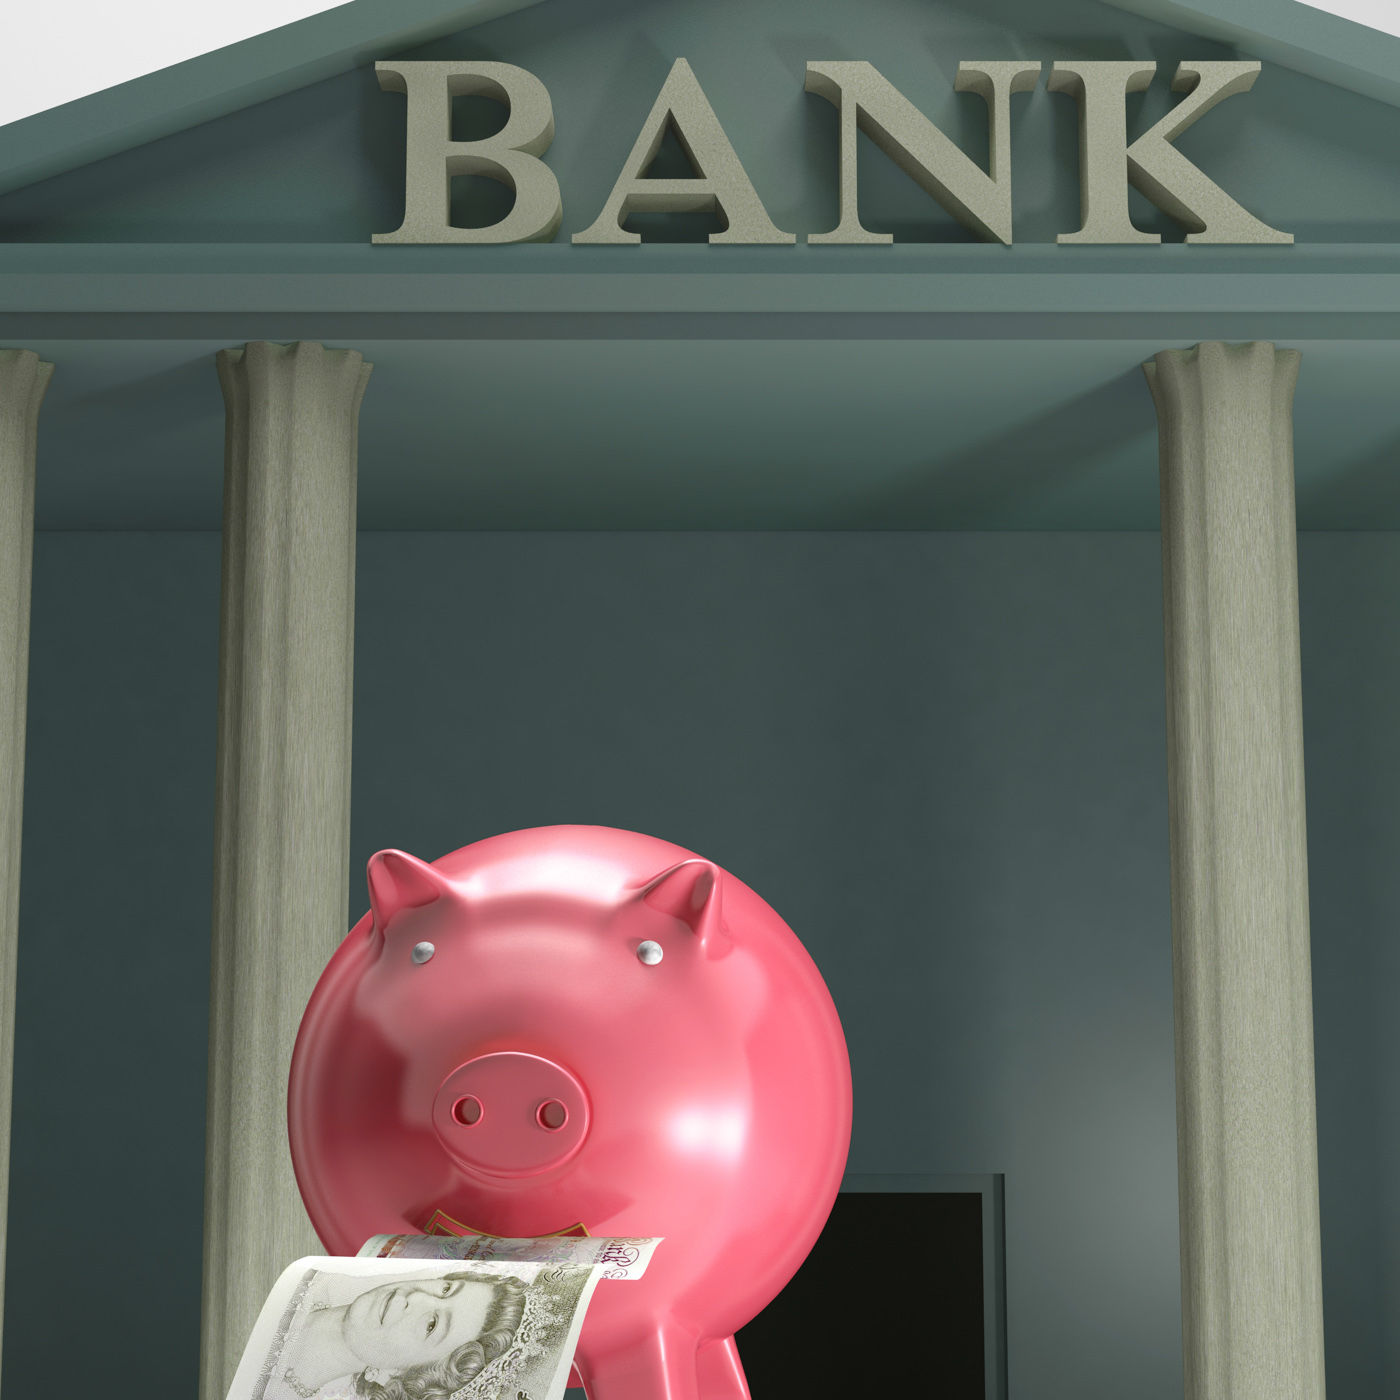 Piggybank On Bank Shows Secure Savings, Bank, Pounds, Wealth, Security, HQ Photo